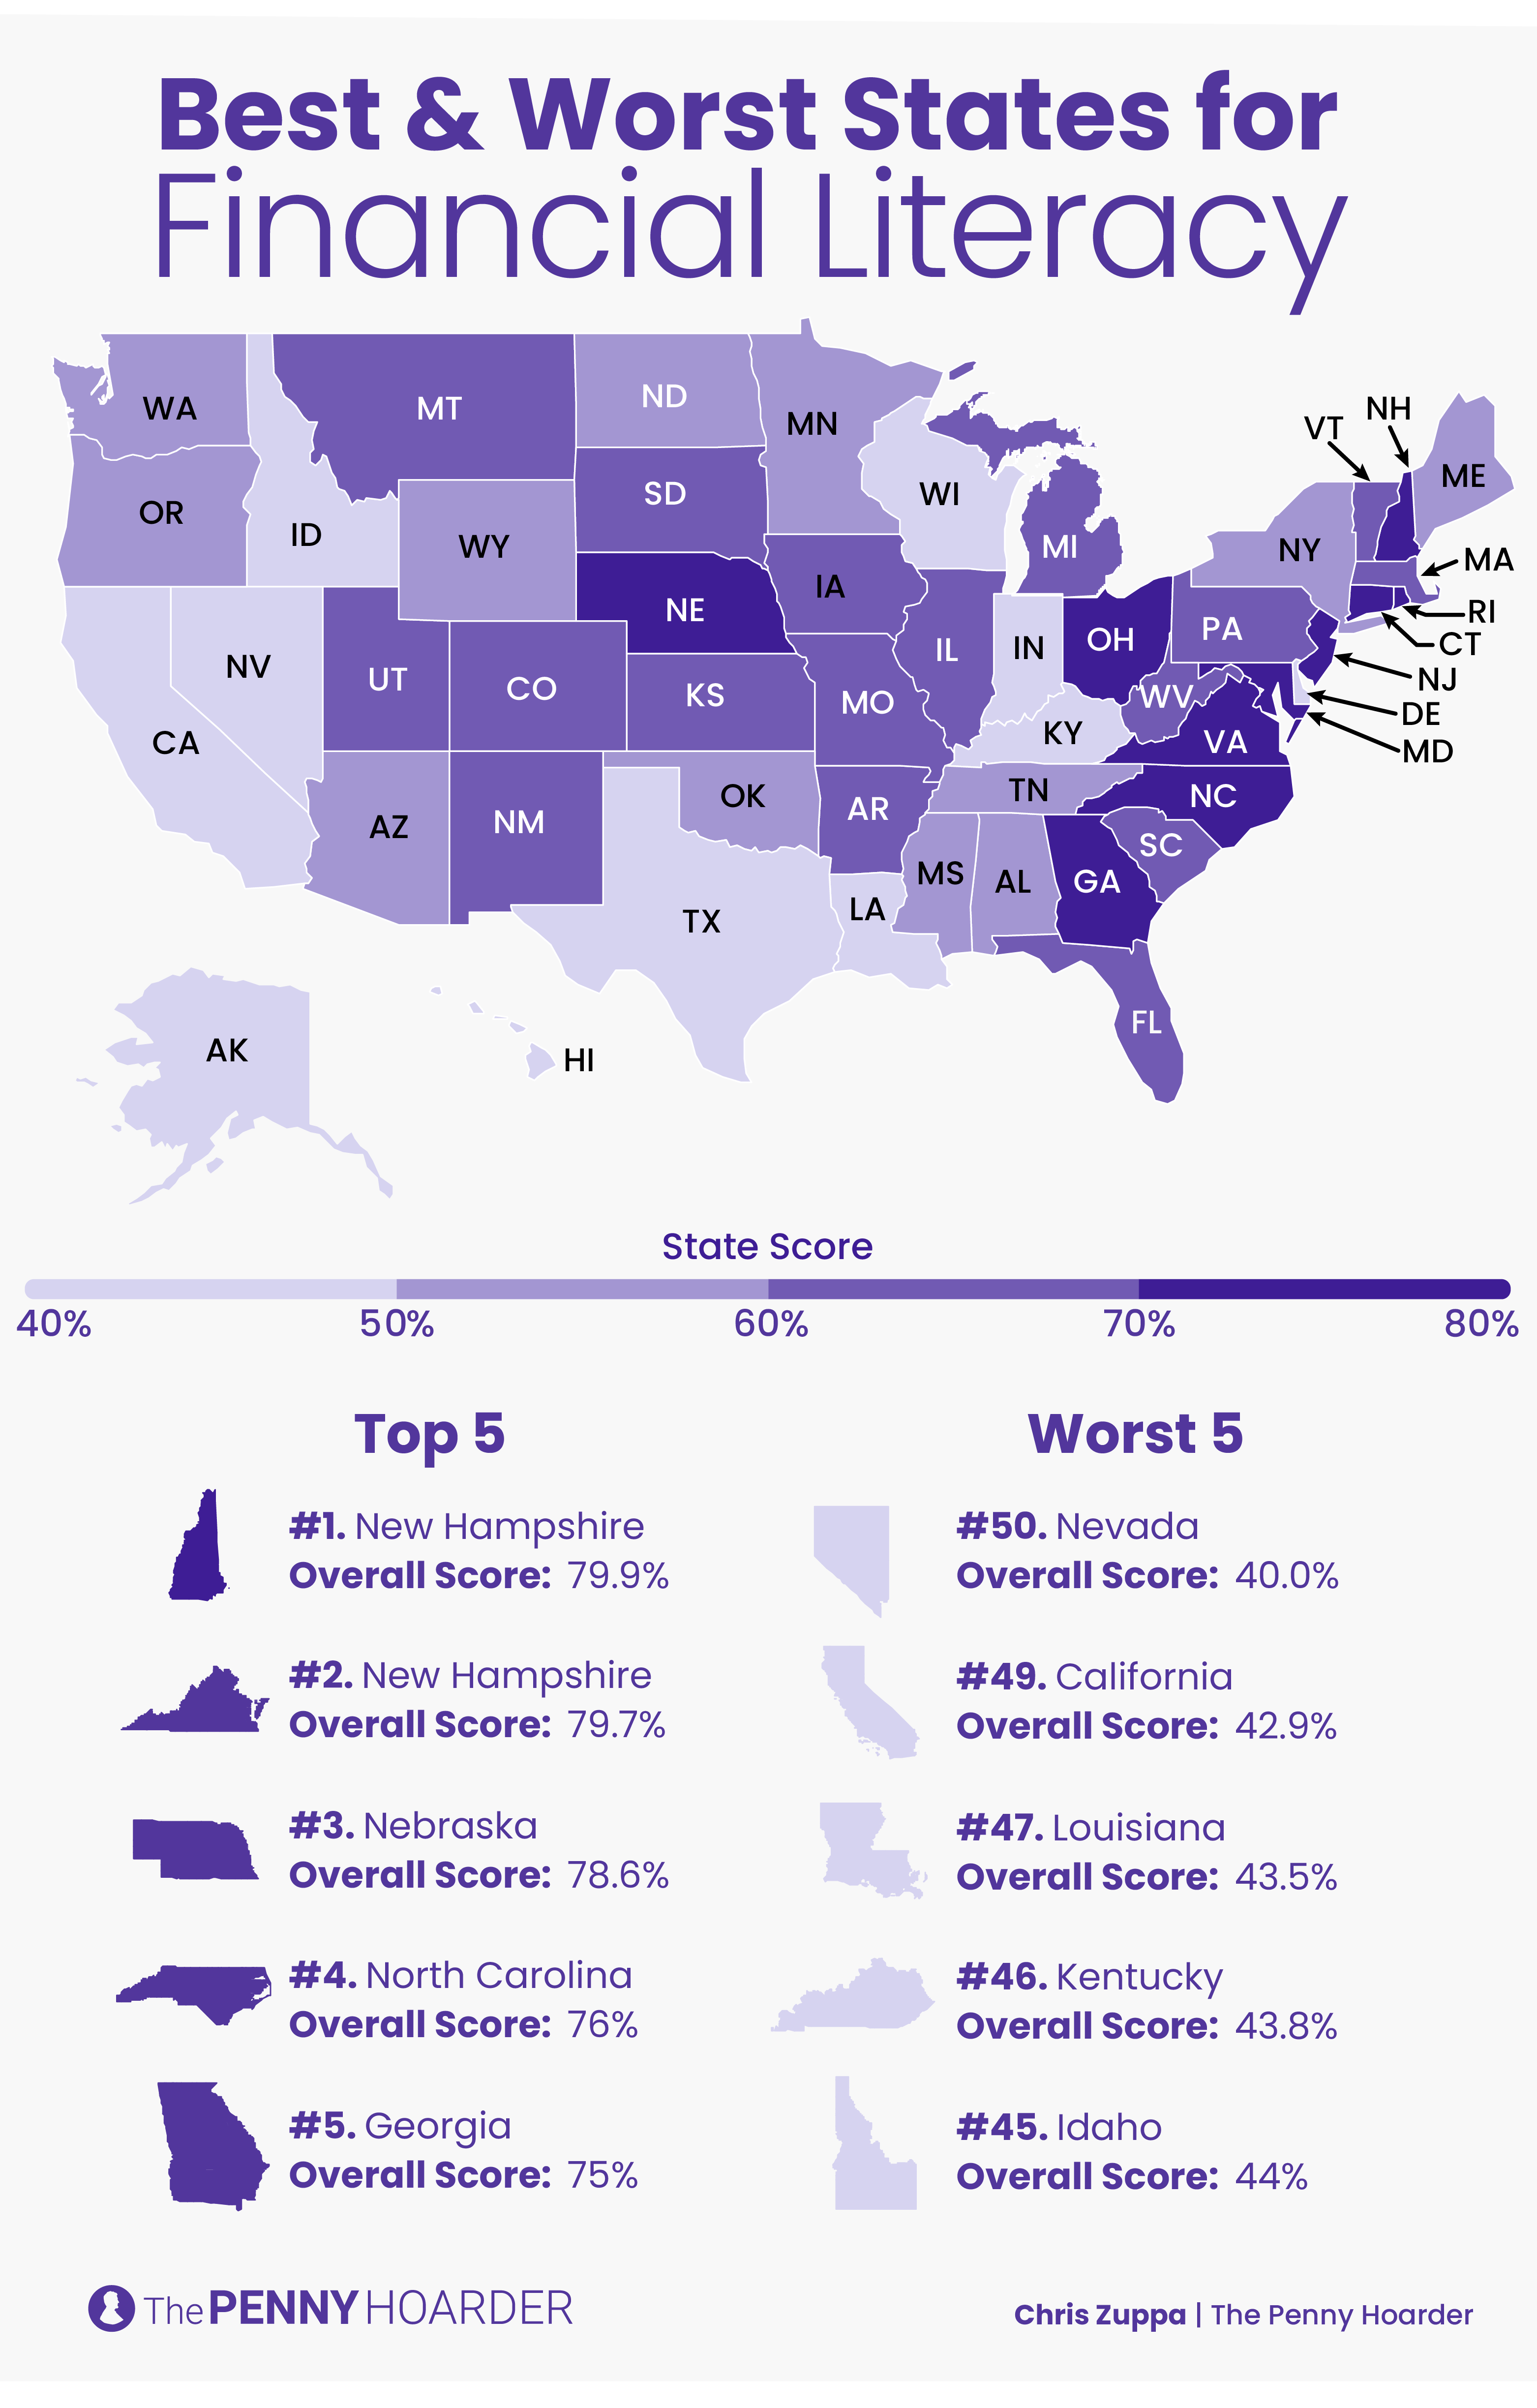 Best & Worst States for Financial Literacy